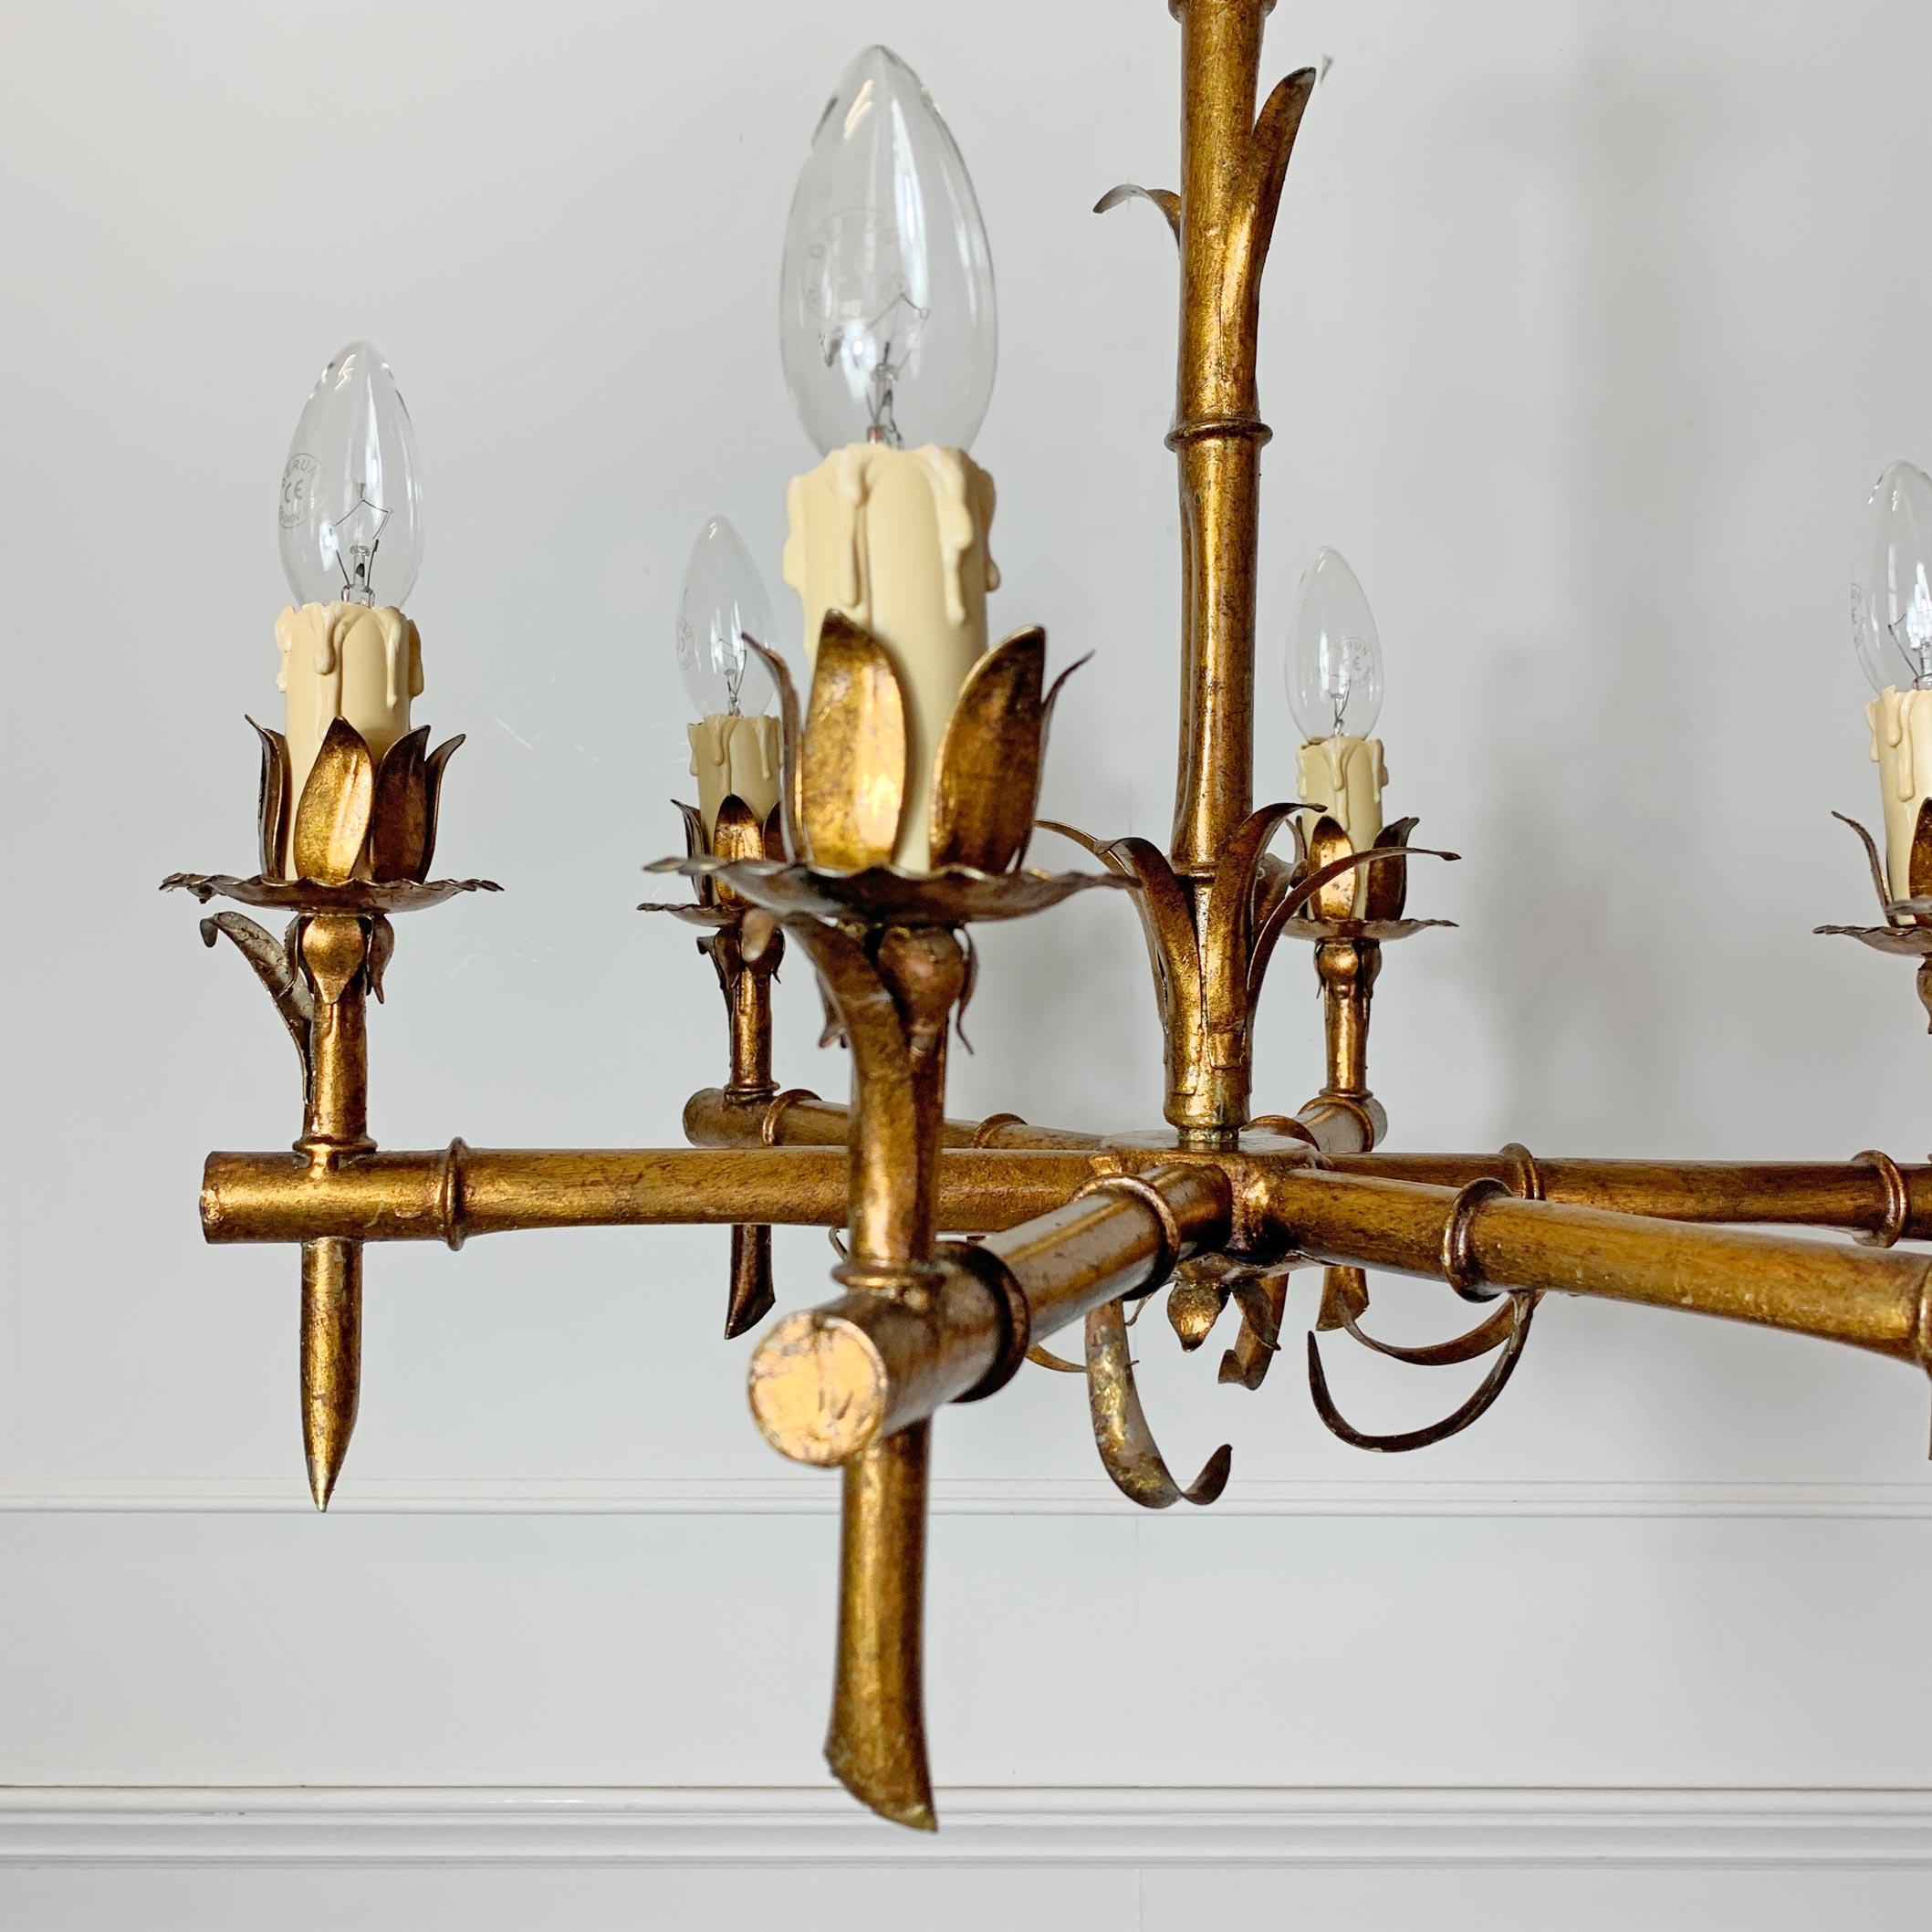 1950s French faux bamboo gilt chandelier
Stunning faux bamboo gilt metal chandelier
France, circa 1950s
The light has 6 arms each with single bulb holder and faux candle sleeve
The original gilt color is a warm soft dark gold
Gilt metal scalloped